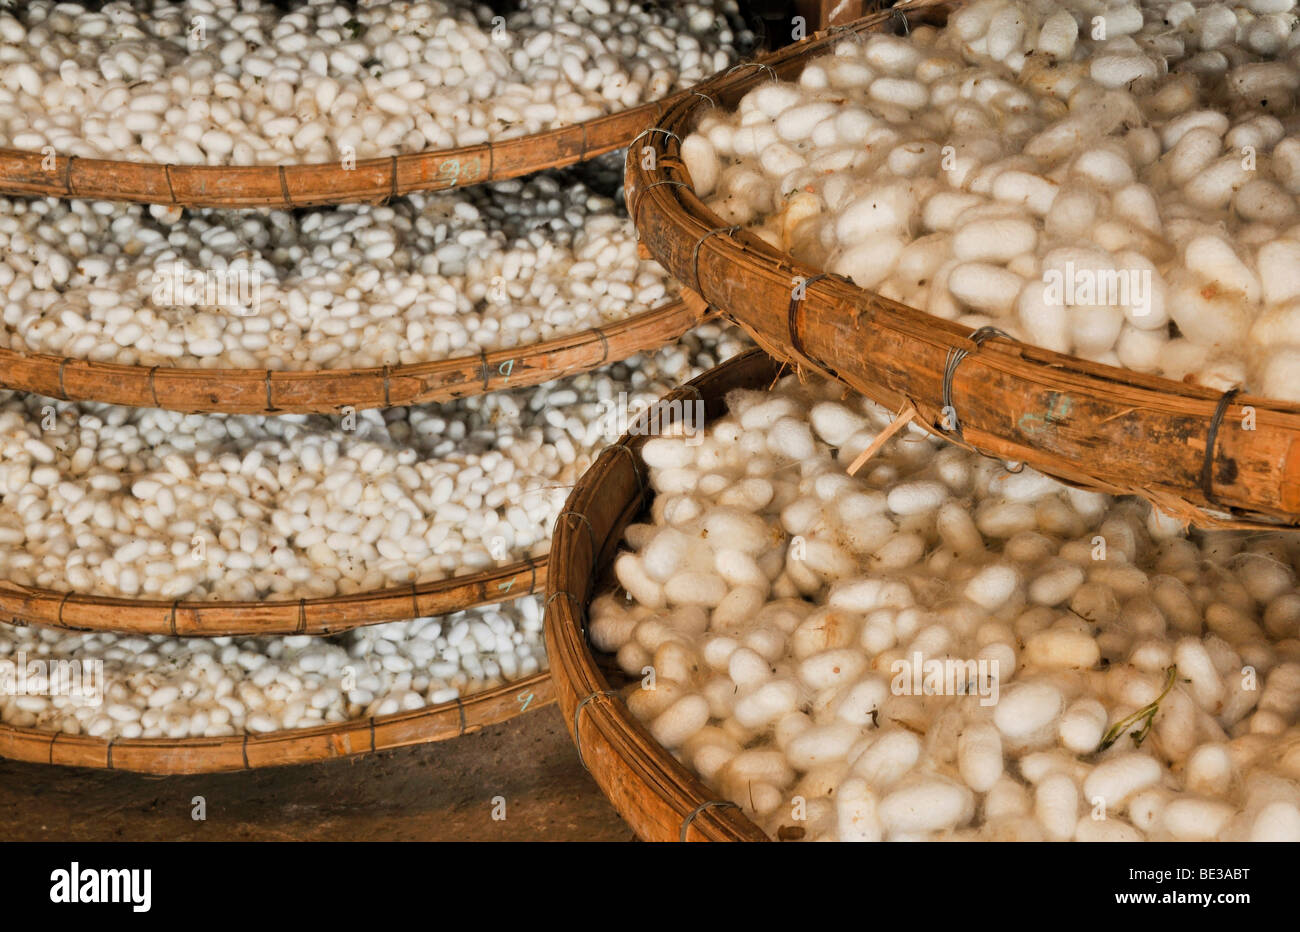 Baskets full of silkworm cocoons in a silk factory, Dalat capital, Central Highlands, Vietnam, Asia Stock Photo